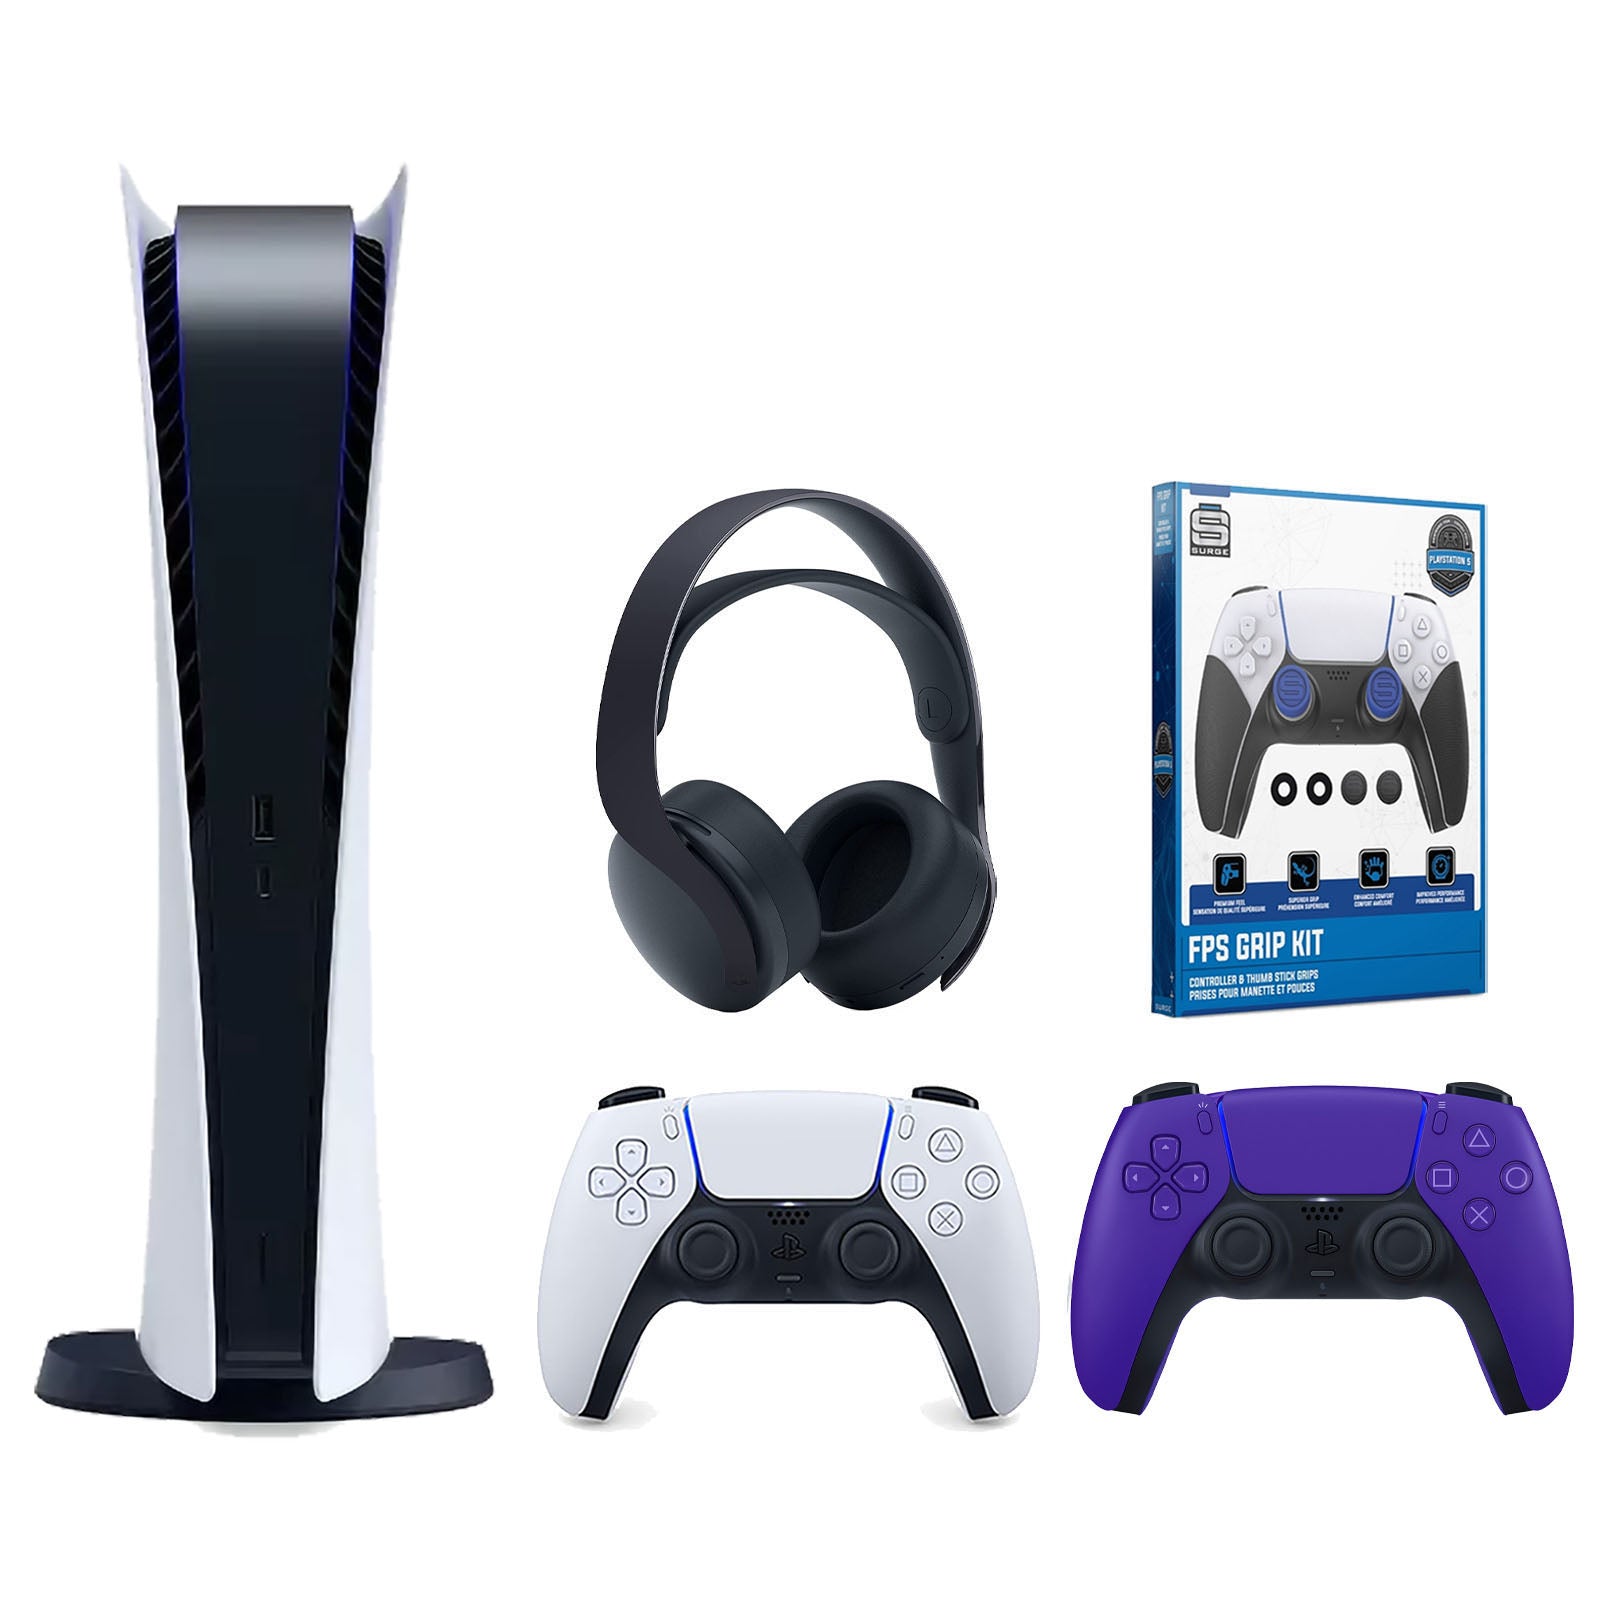 Sony Playstation 5 Digital Edition Console with Extra Purple Controller, Black PULSE 3D Headset and Surge FPS Grip Kit With Precision Aiming Rings Bundle - Pro-Distributing